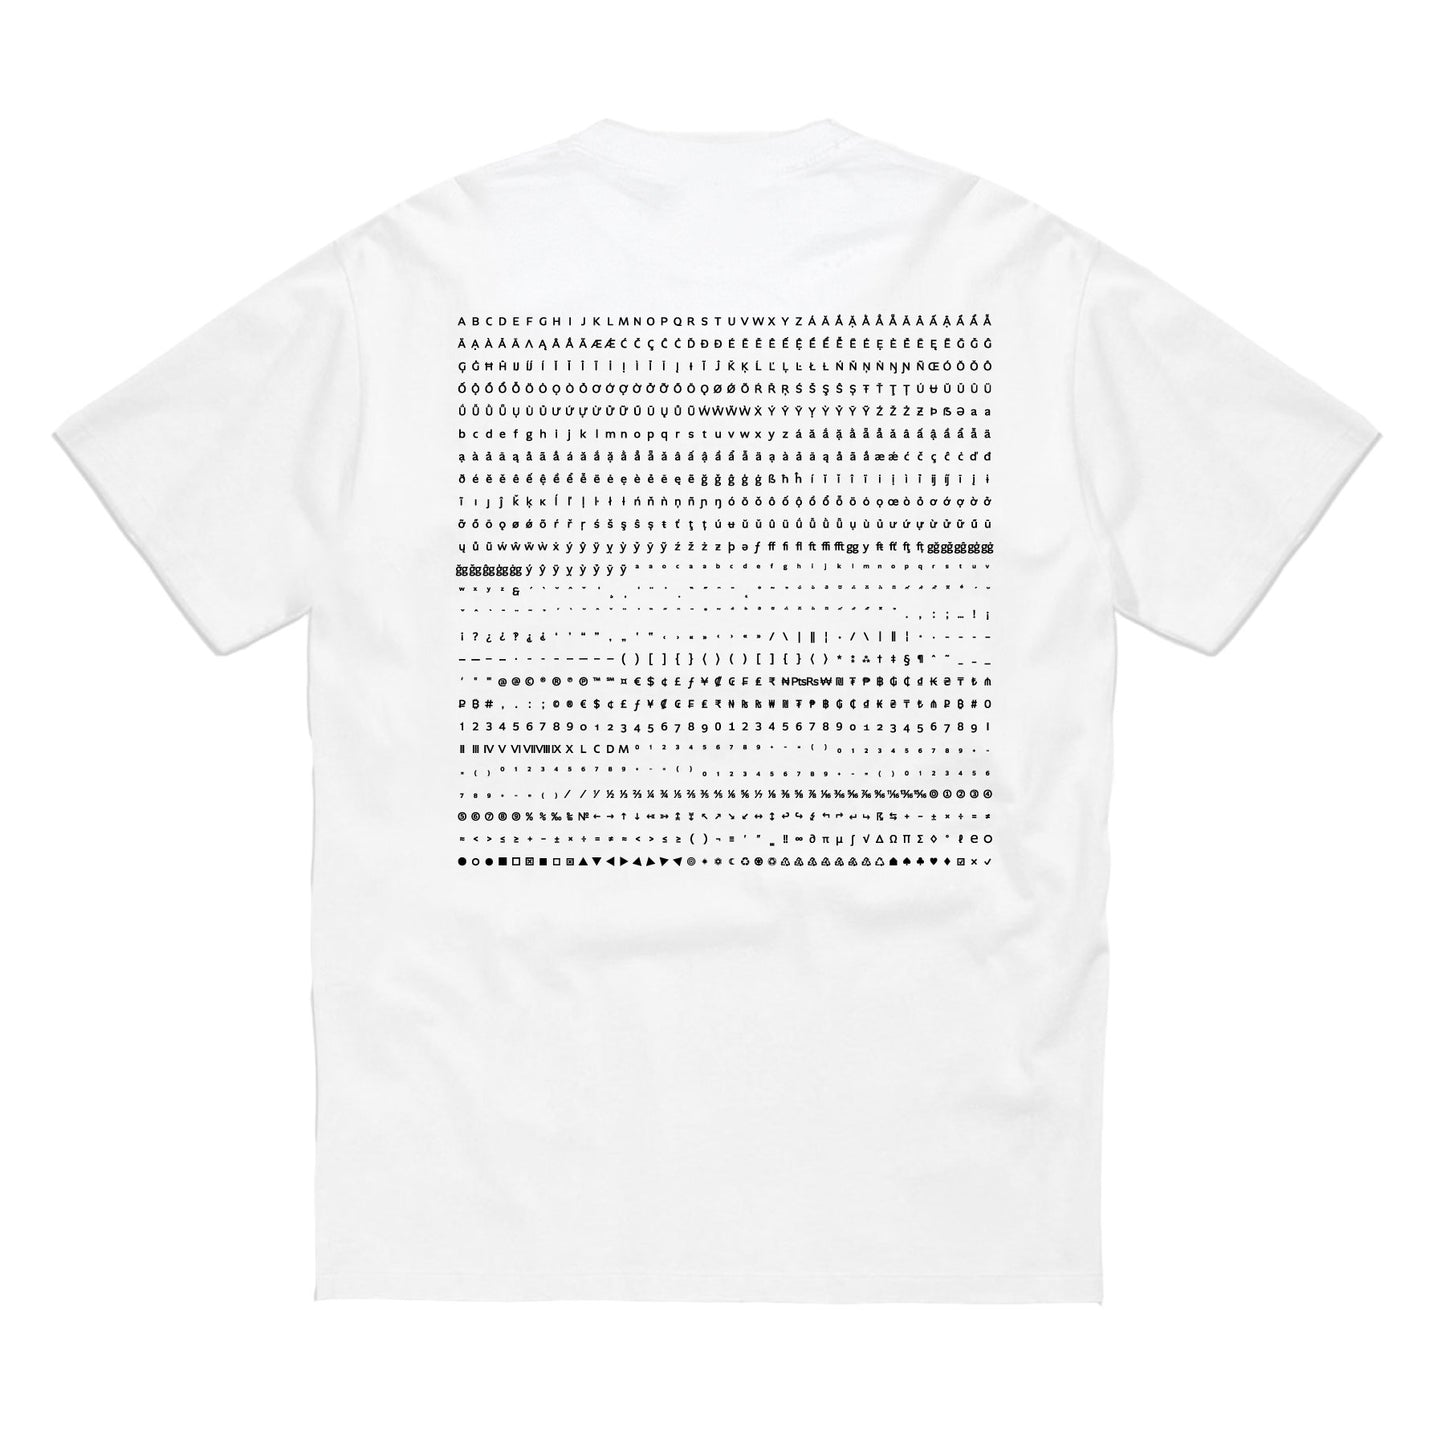 ST-02 Ghost "Very Normal" T-shirt